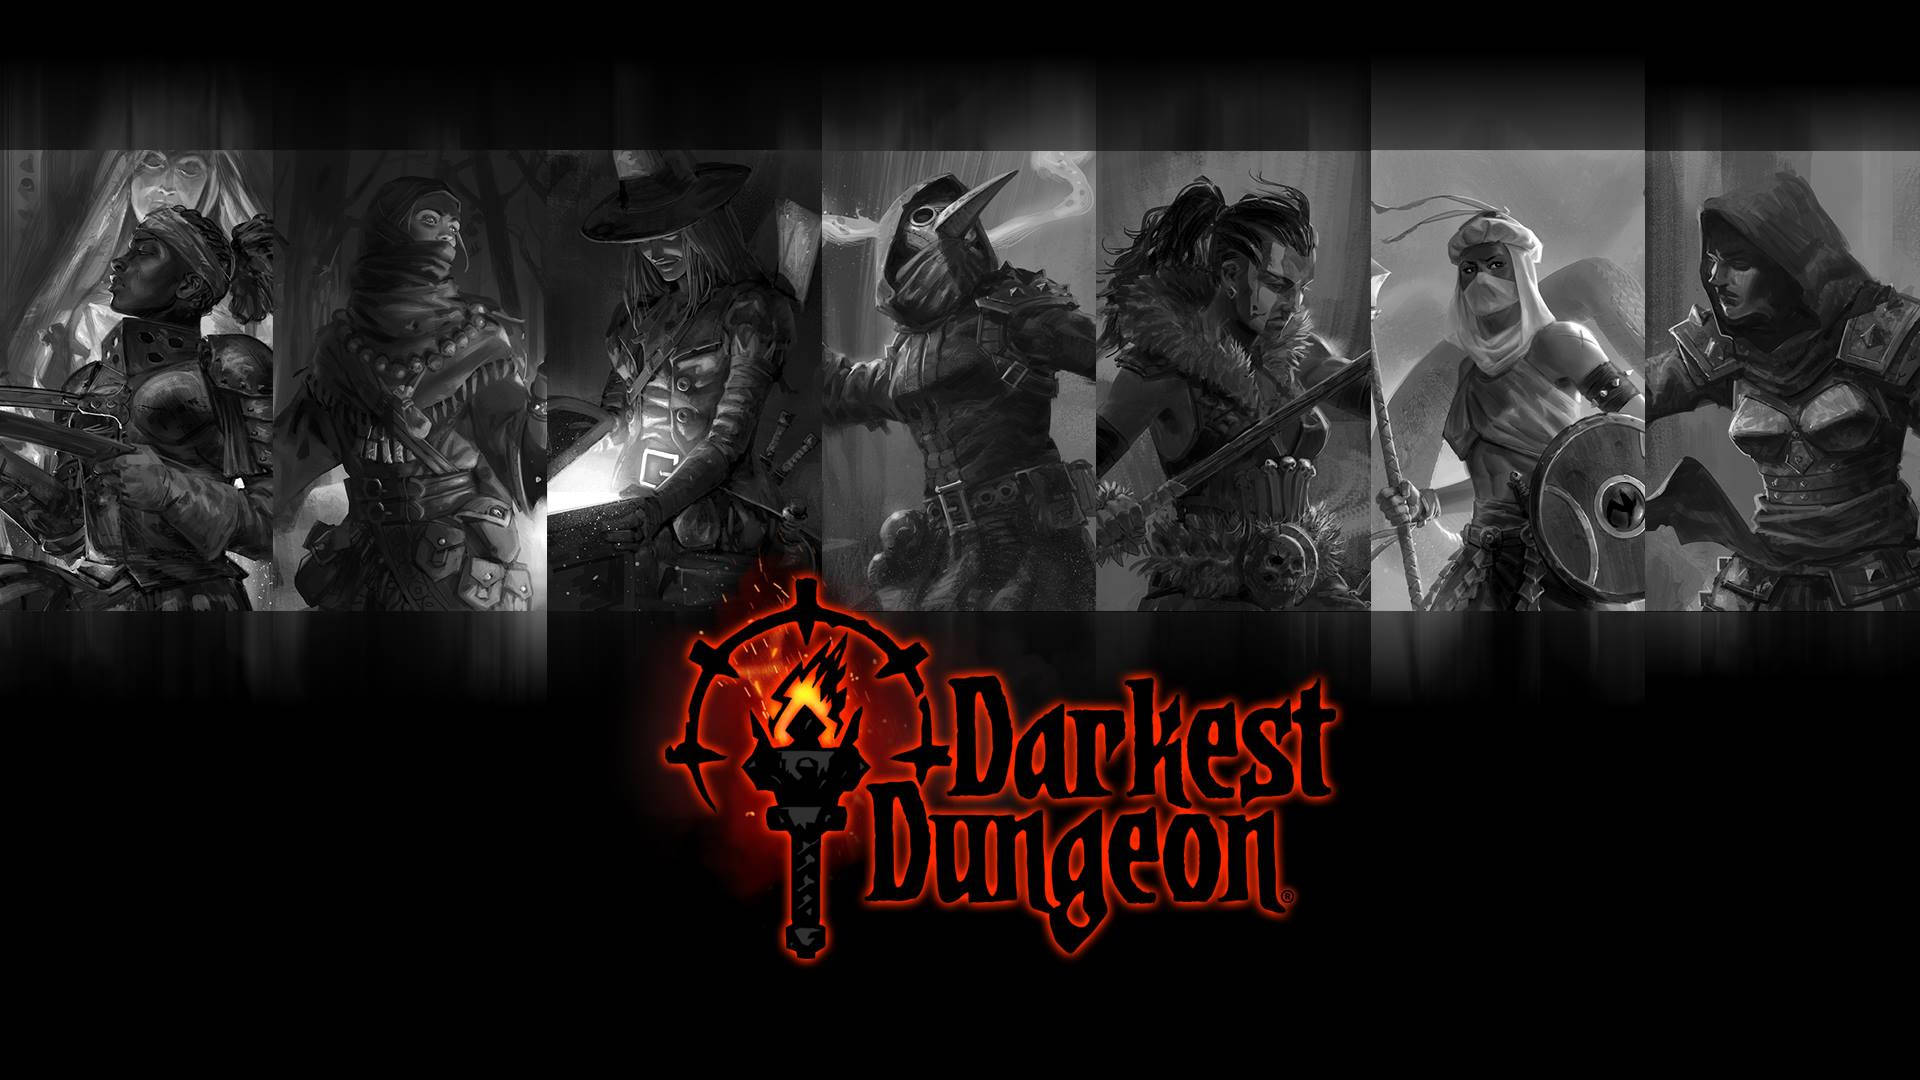 This team has been tasked with unravelling the mysteries of Darkest Dungeon Wallpaper